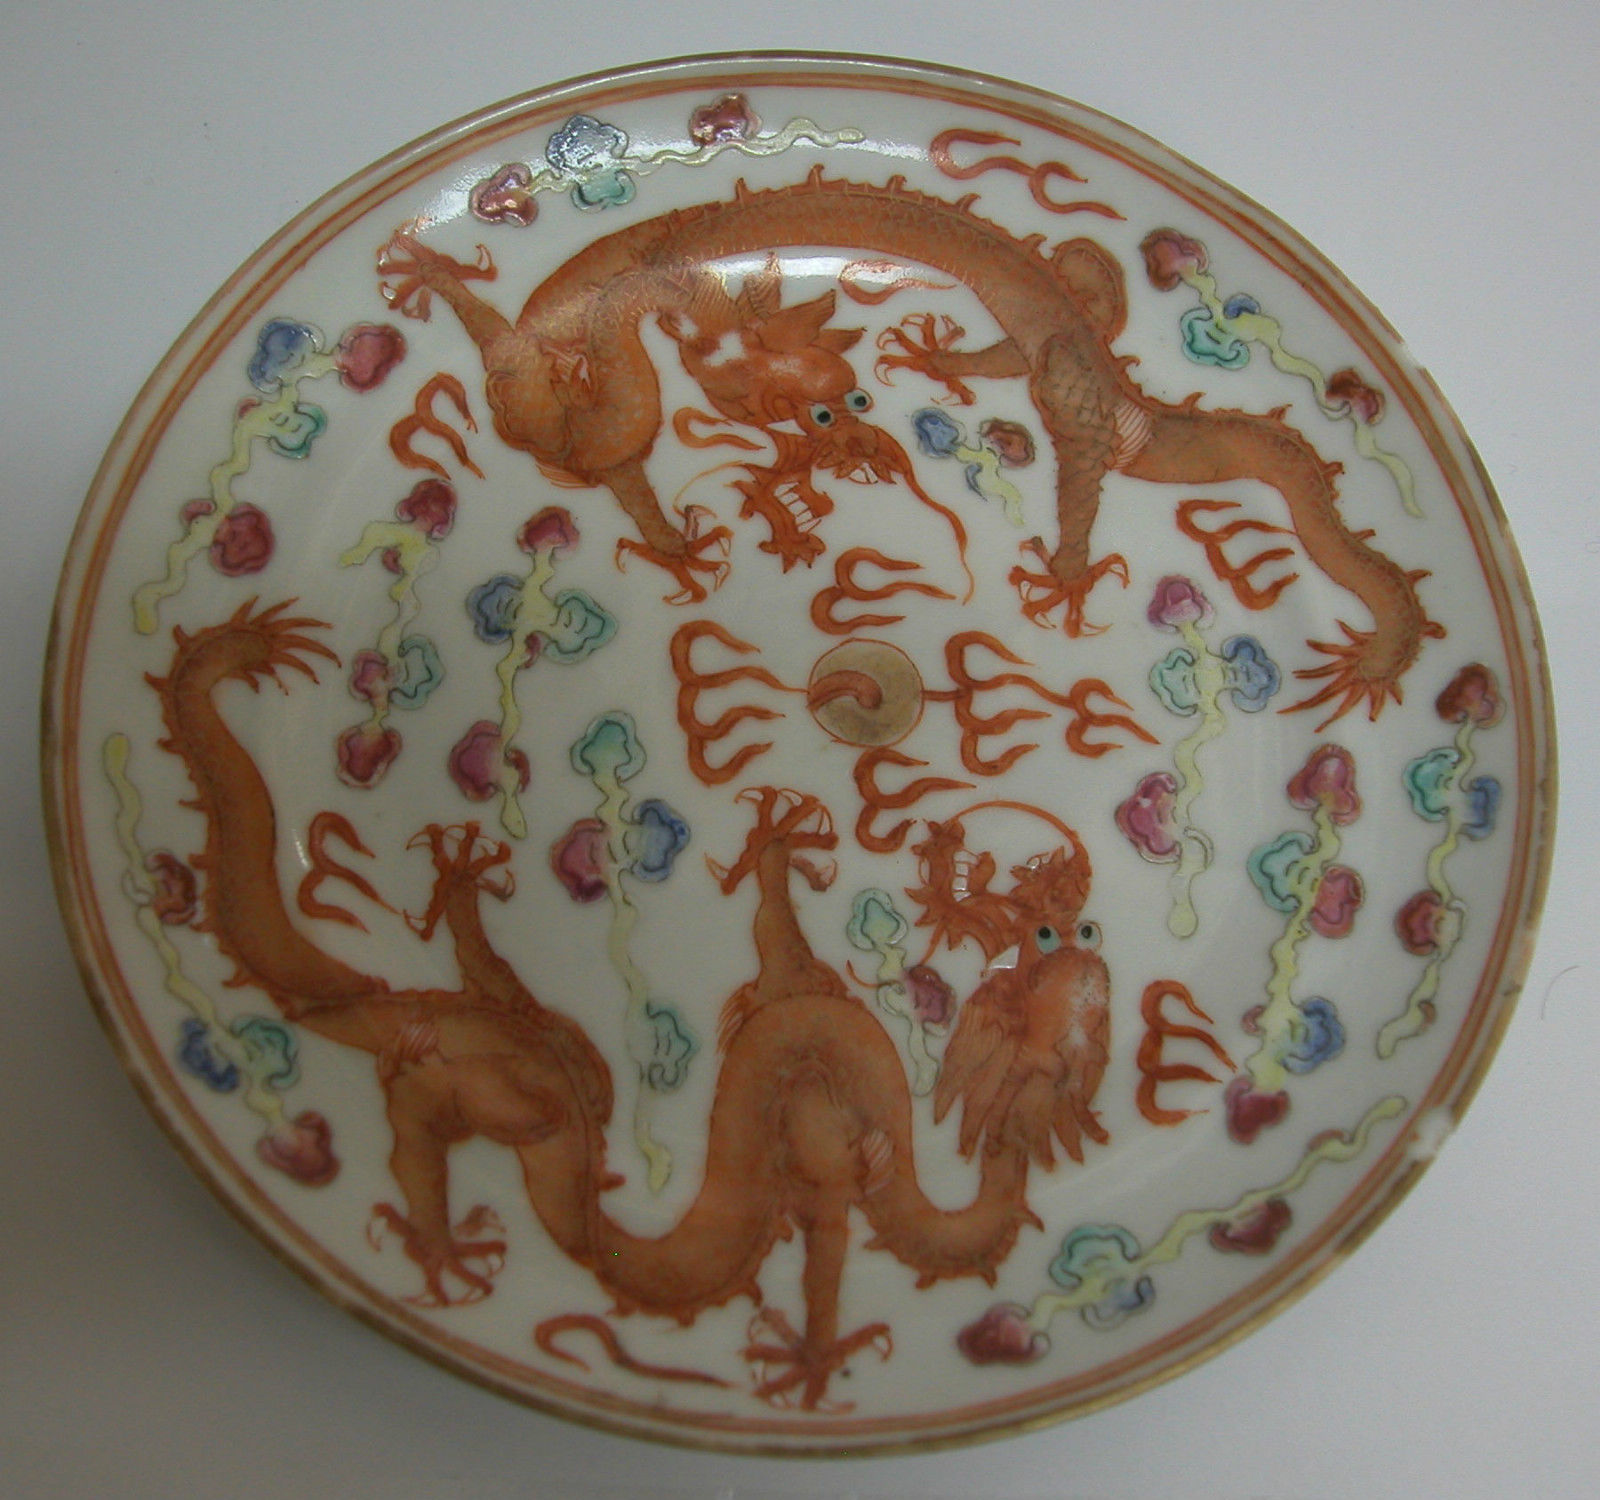 A RARE FINE ANTIQUE CHINESE  PORCELAIN PLATE DECORATED WITH DRAGONS